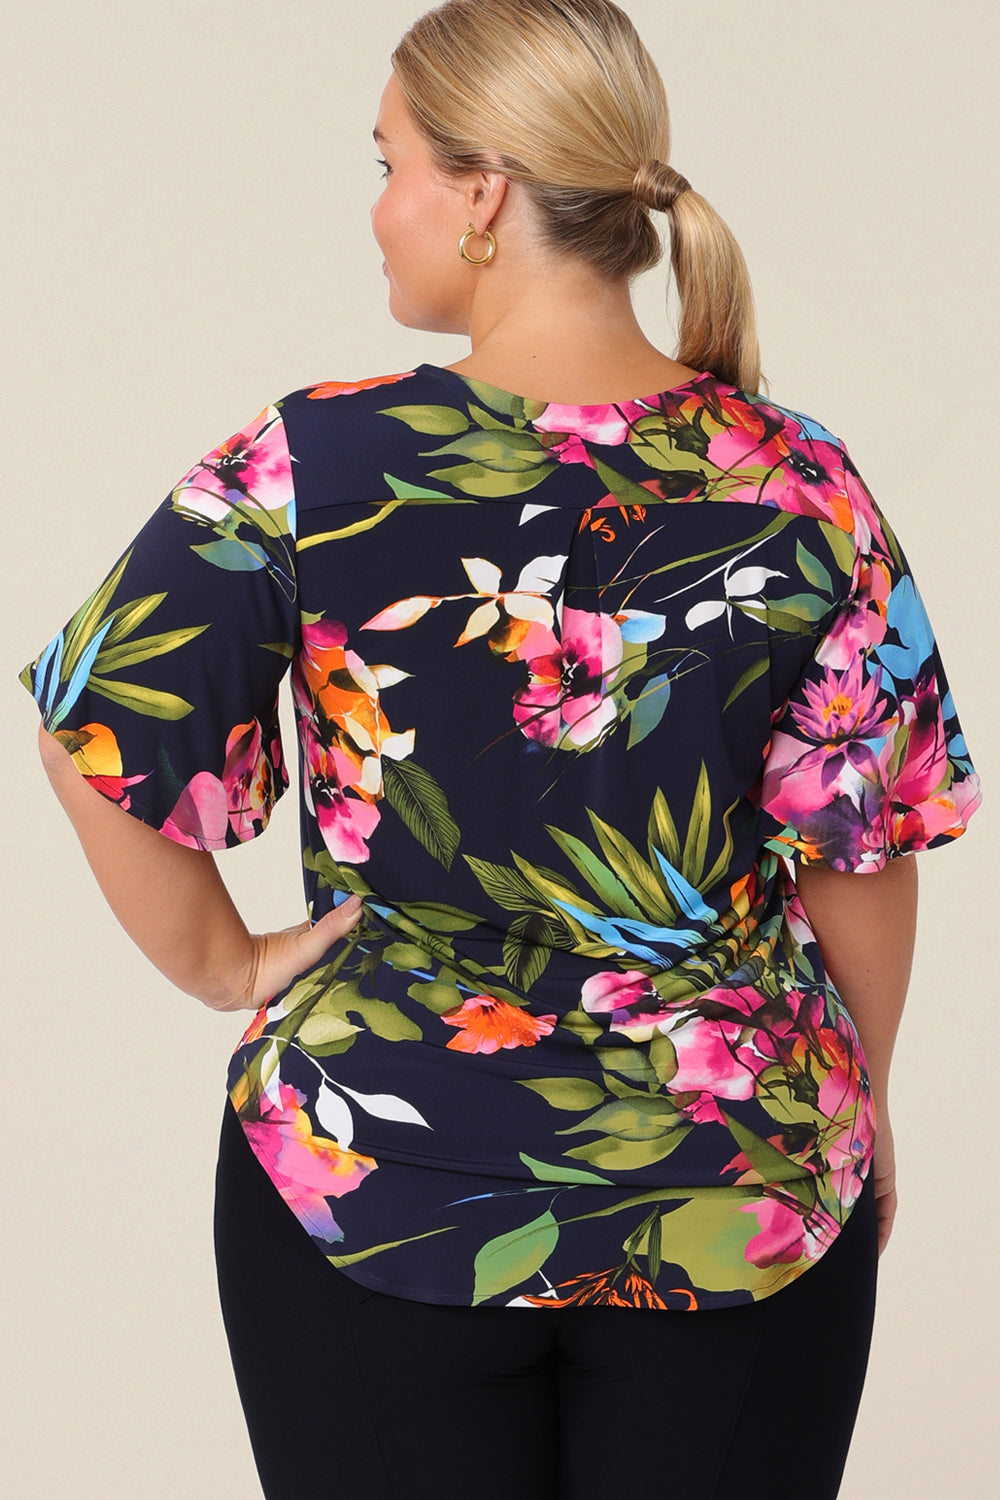 Back view of a plus size, size 14 woman wears a V-neck floral top with short flutter sleeves. Made from dry-touch jersey, this top is comfortable for everyday style. Designed and made in Australia for petite to plus size women.